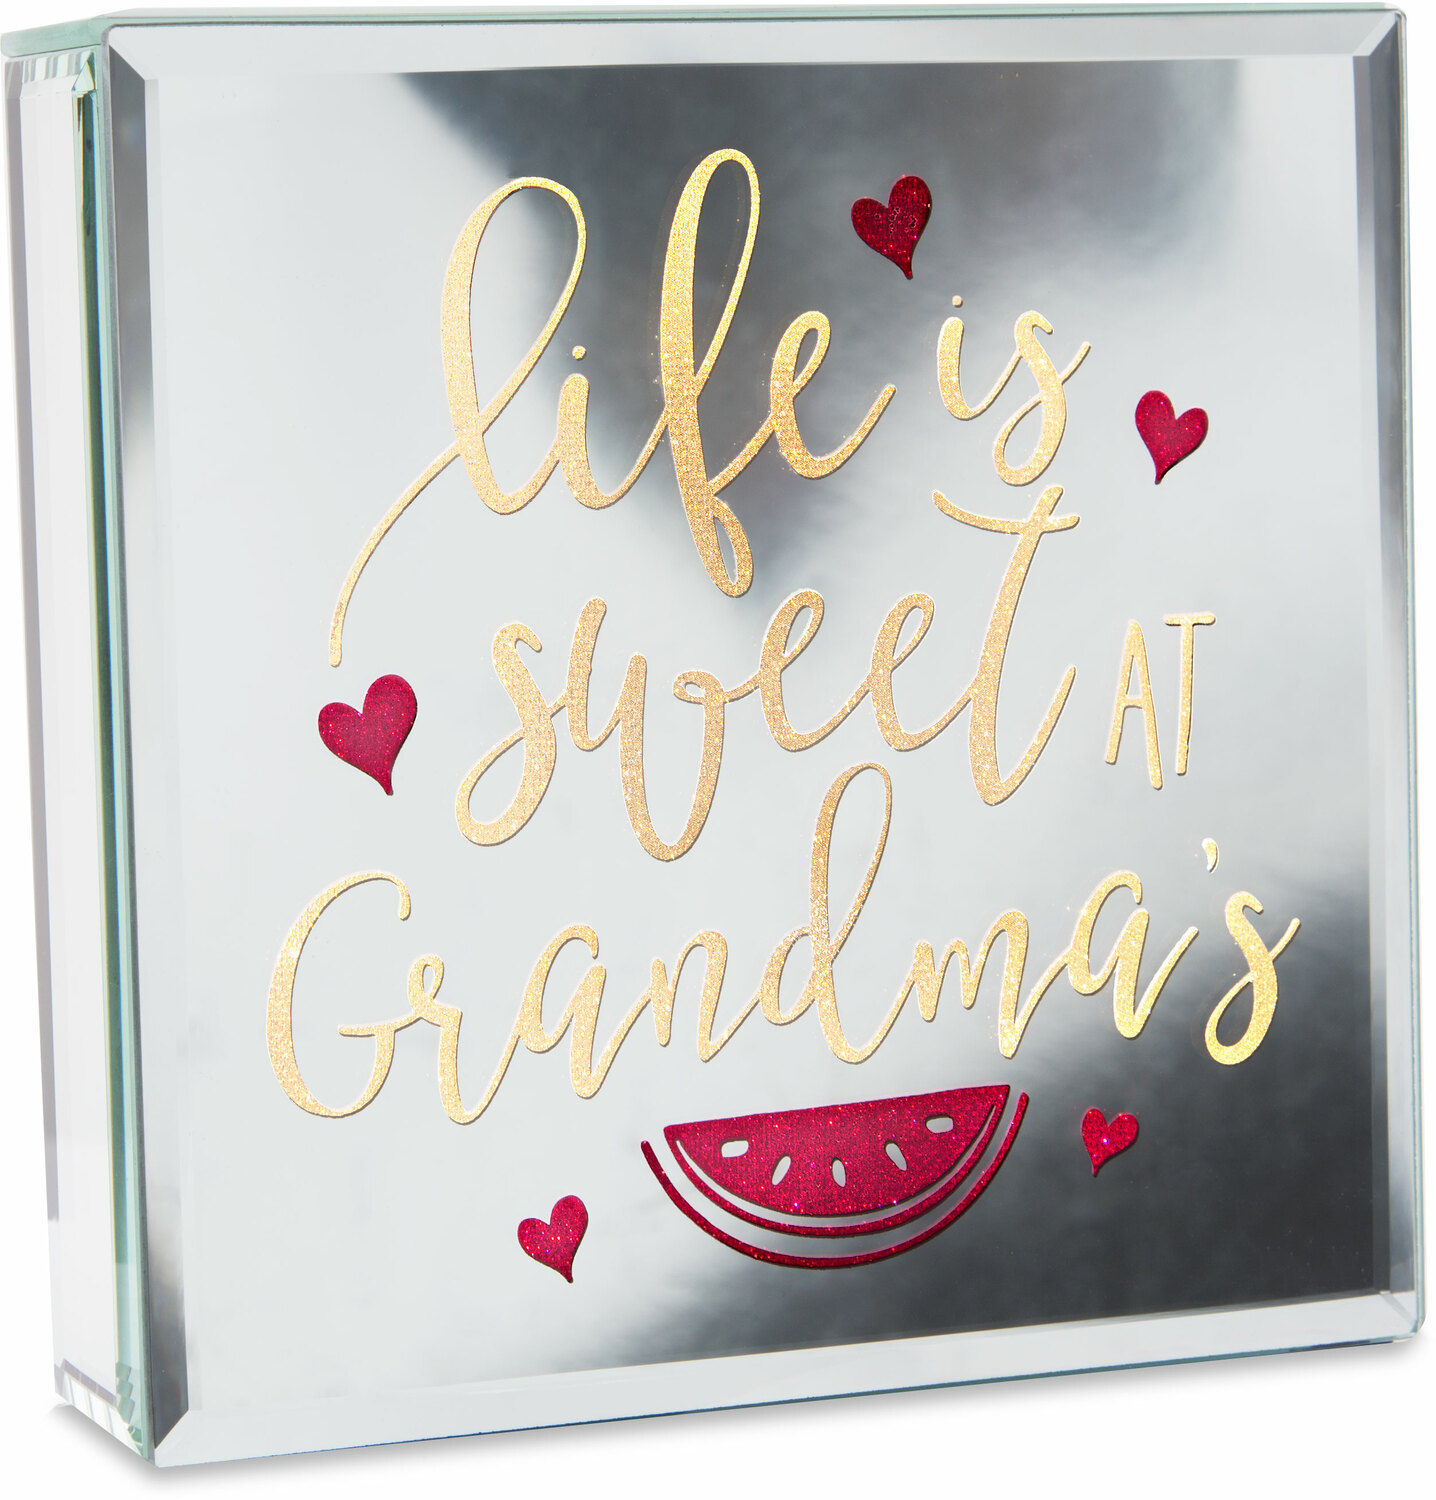 Grandma by Reflections of You - Grandma - 6" Lit-Mirrored Plaque